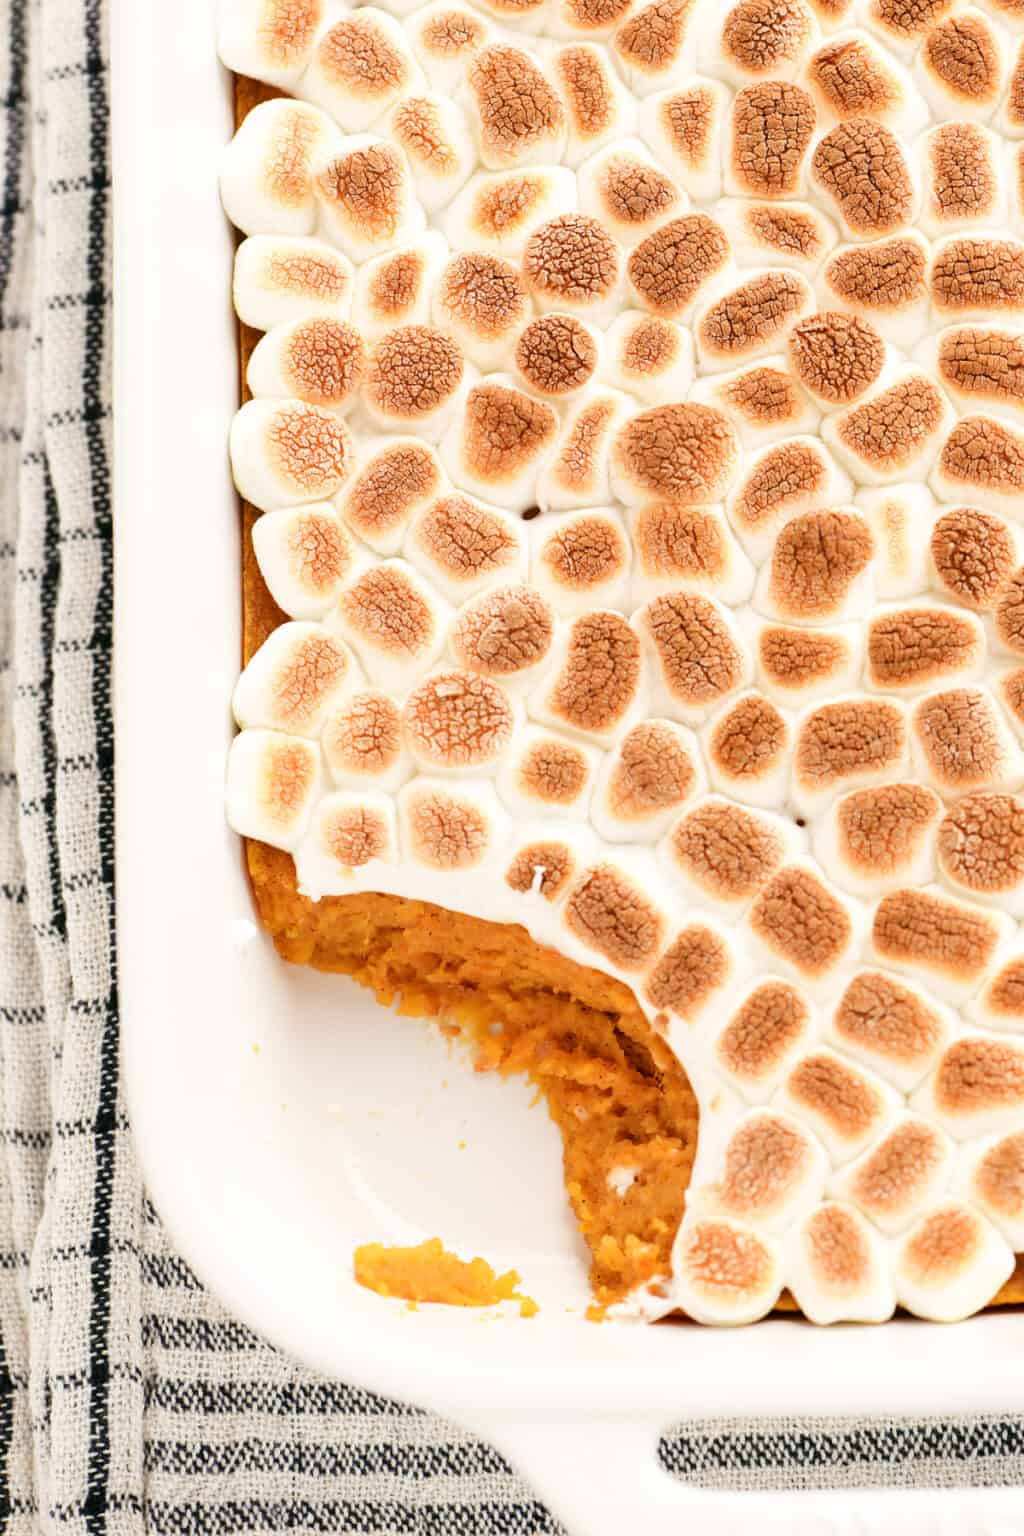 Sweet Potatoes with Marshmallows - The Gunny Sack